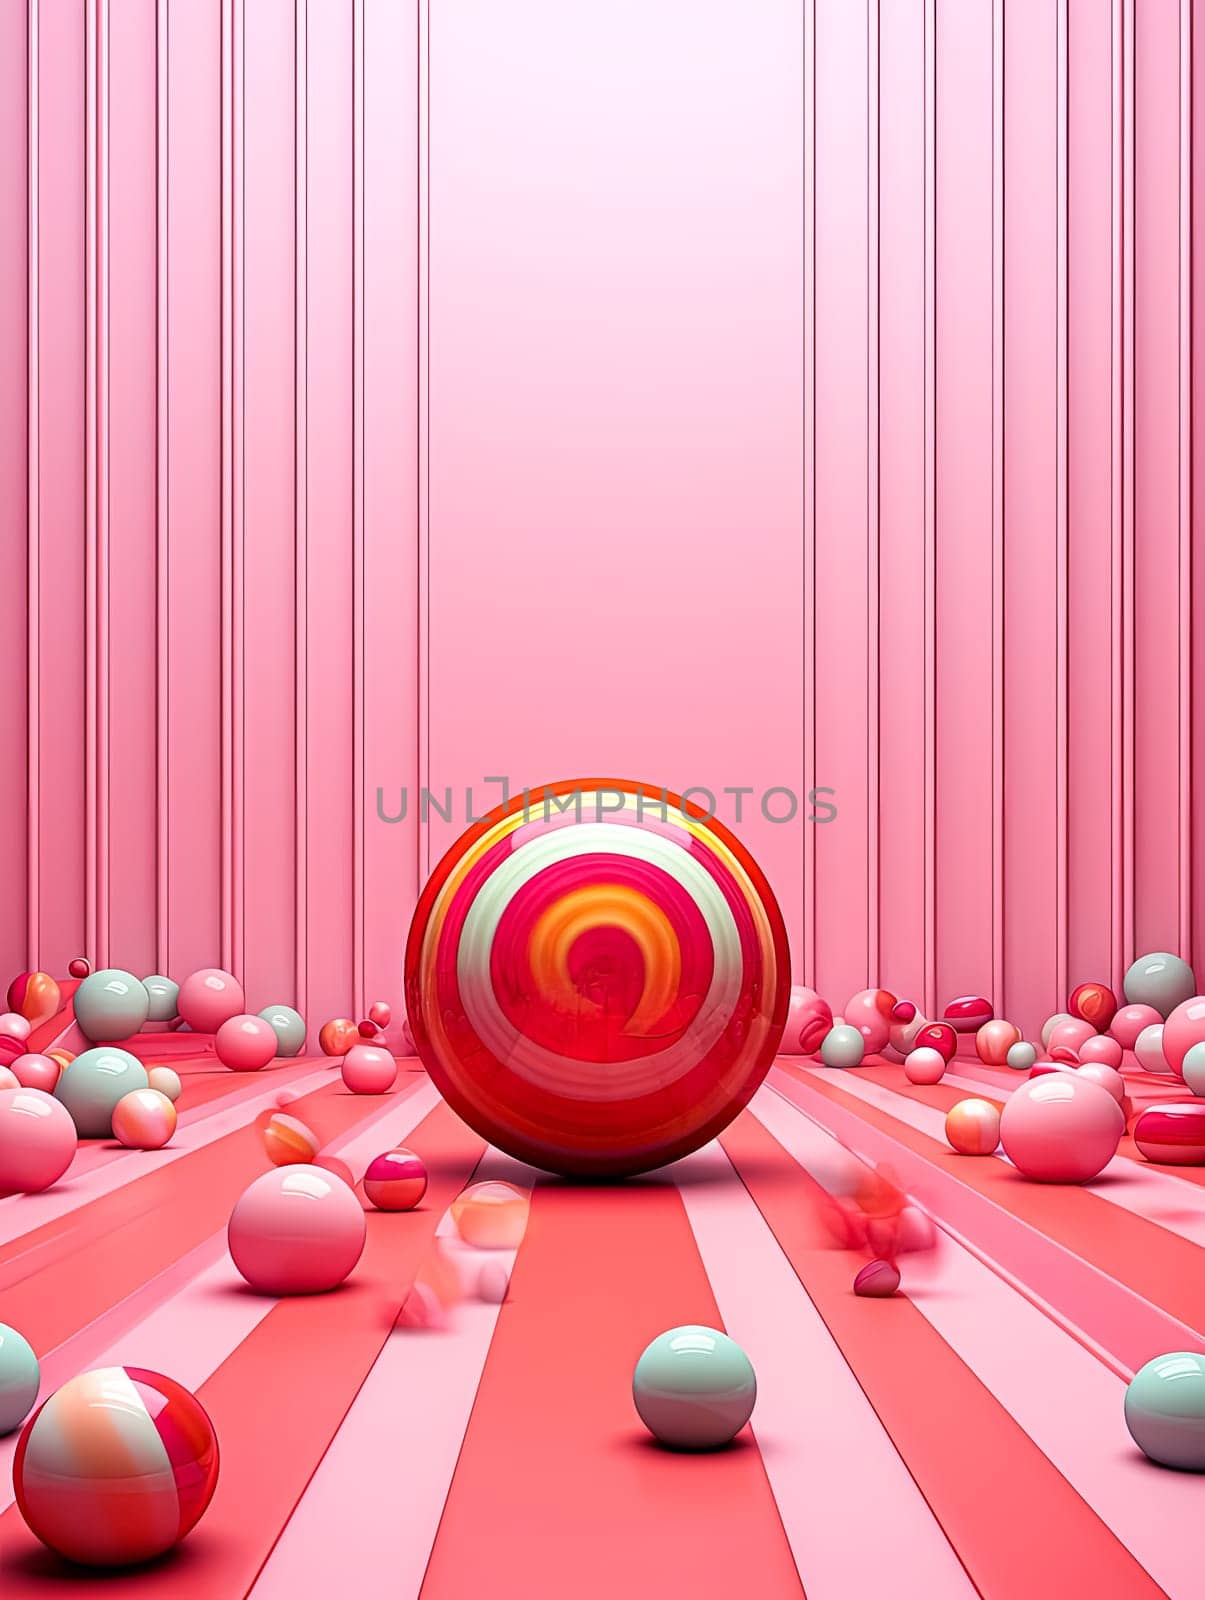 A colorful display of candy and lollipops on a pink background. The candy is arranged in a way that makes it look like a candy store. Scene is cheerful and playful